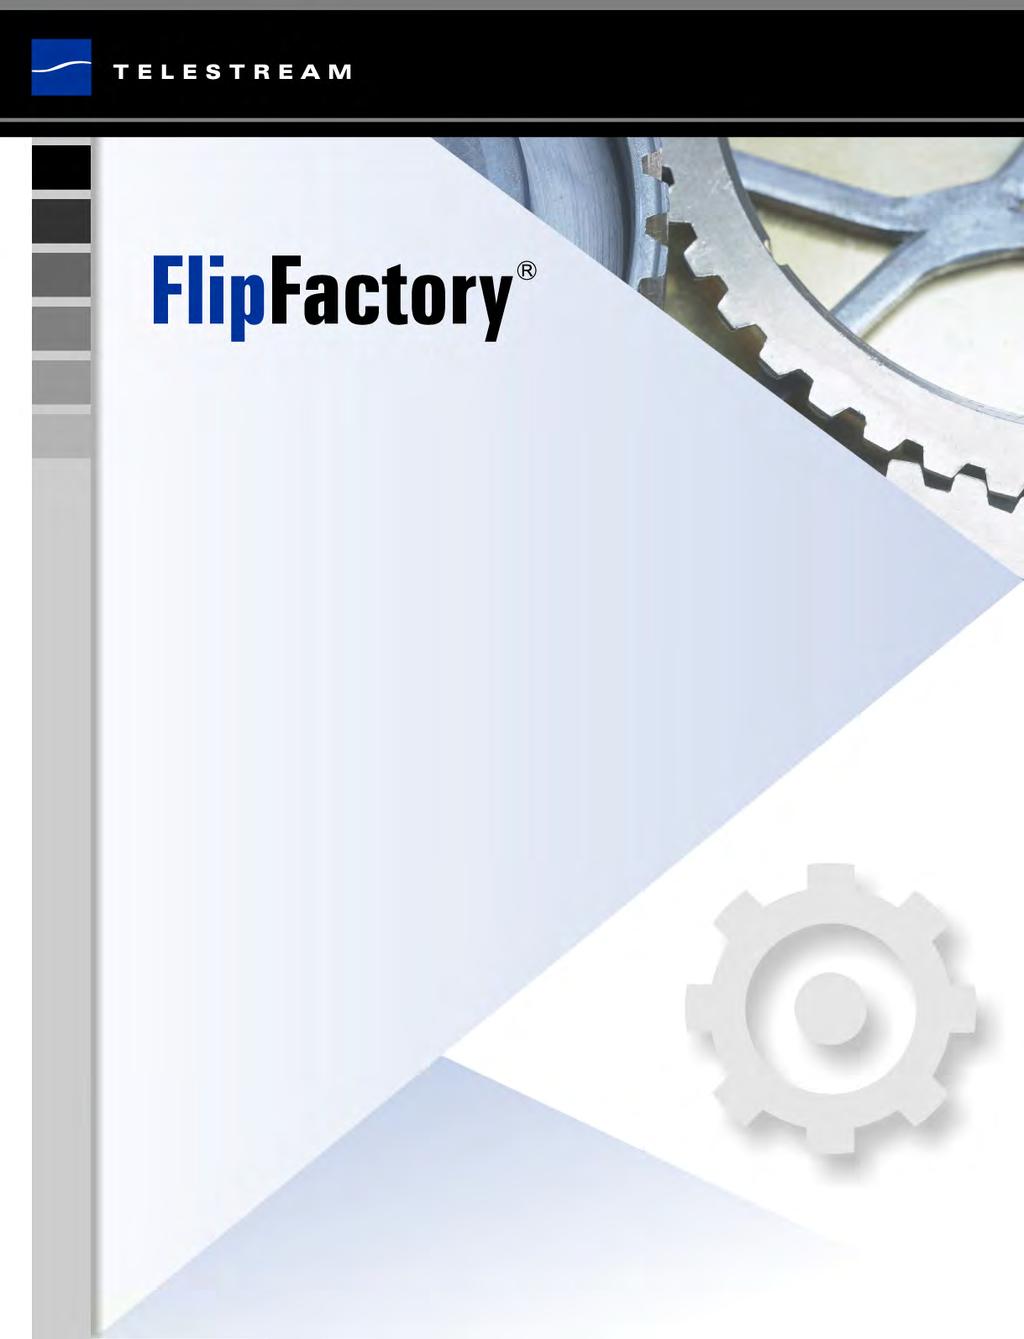 A PP NOTE USING FLIPFACTORY WITH SEACHANGE BMLE SERVERS Introduction...2 FlipFactory and BMLe Versions...2 Connecting FlipFactory & BMLe via FSI...3 Verifying FTP Connectivity.